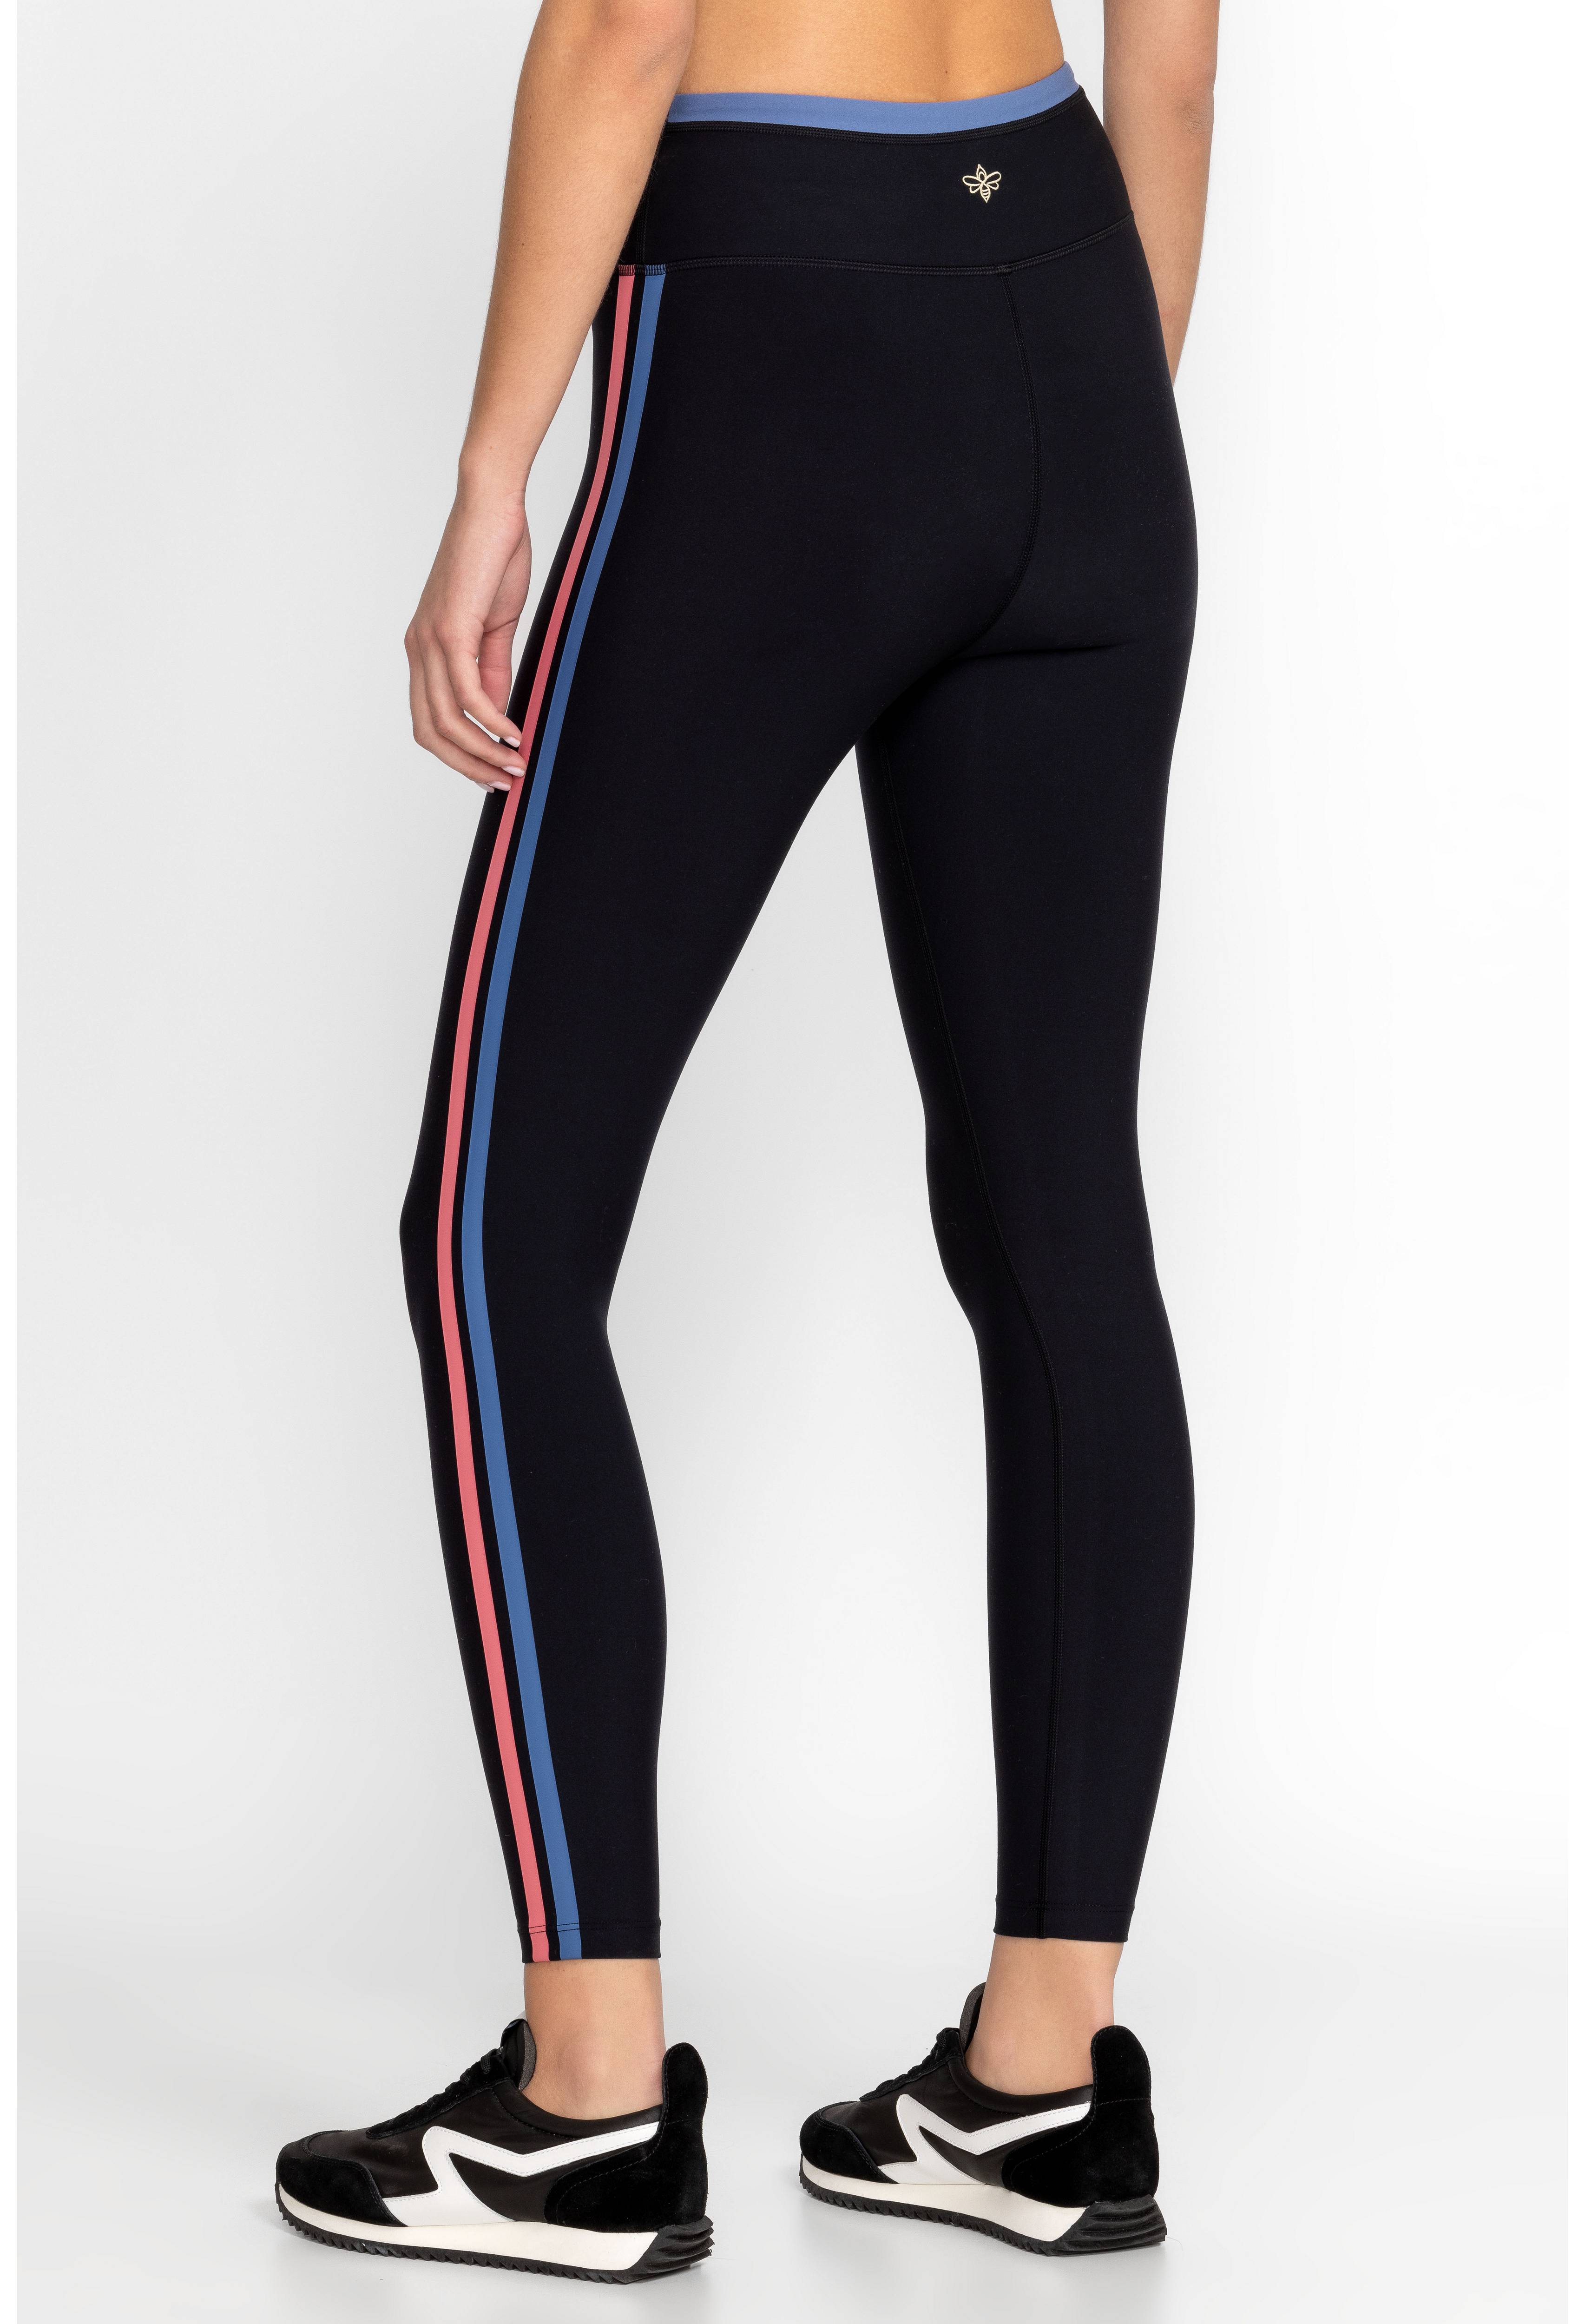 High Waist Legging With Stripes, , large image number 4